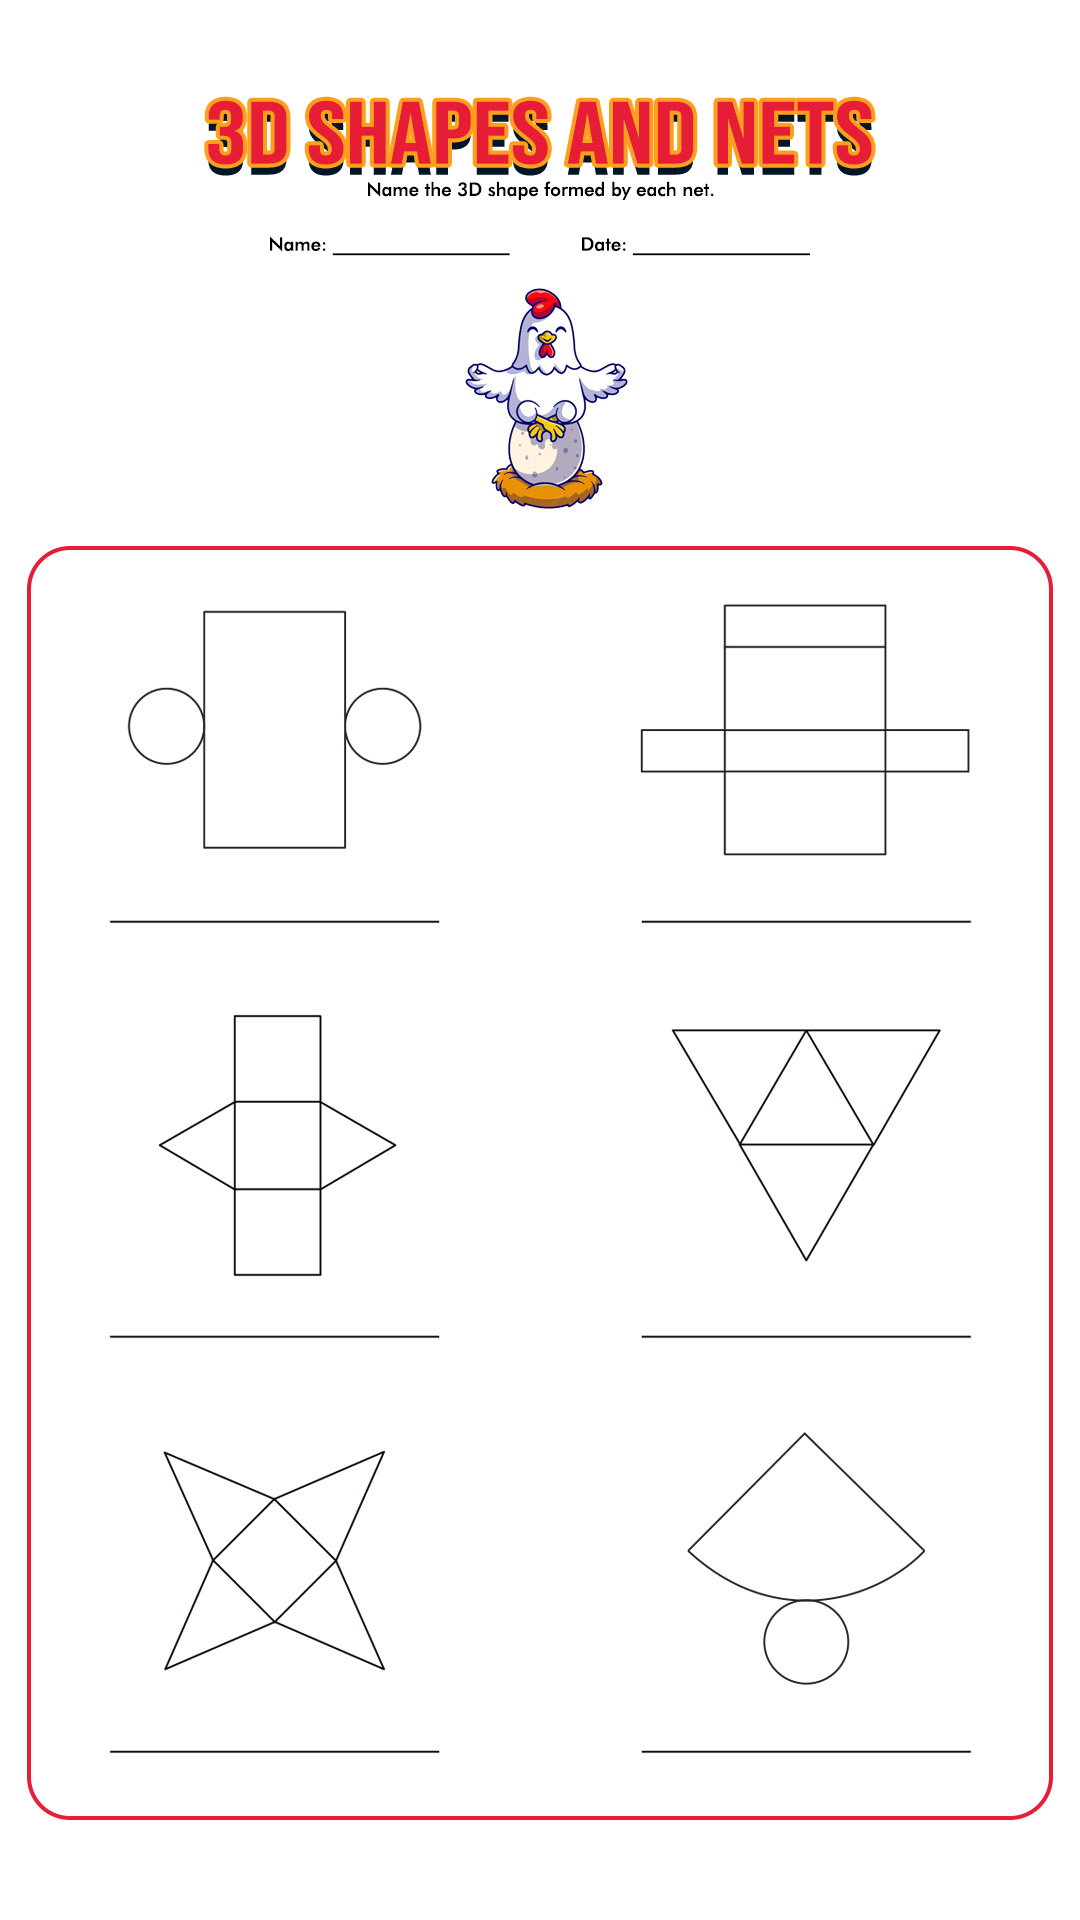 Nets of 3D Shapes Printables